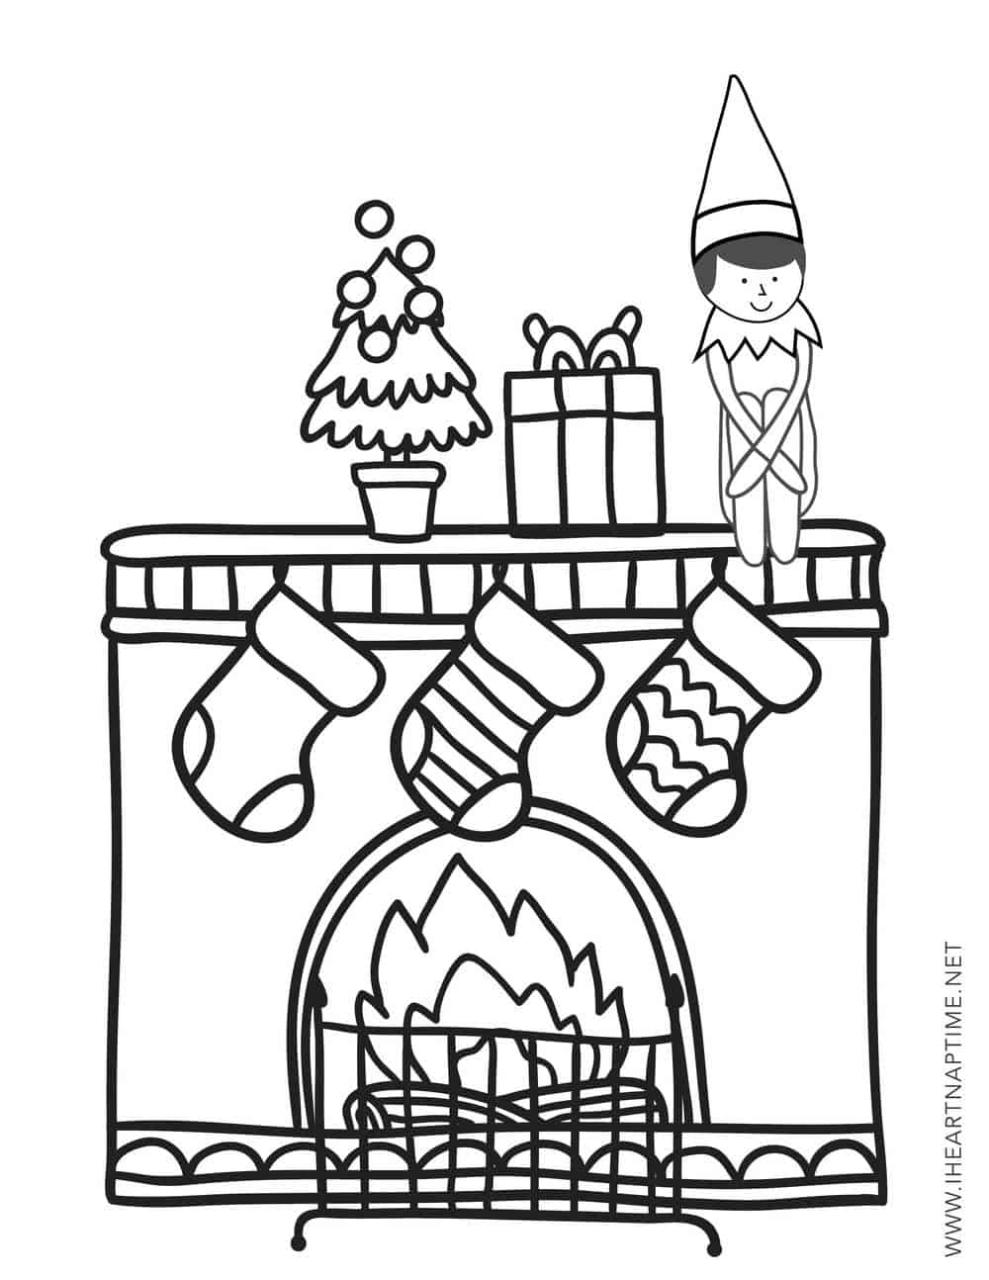 Coloring Pages Elf On The Shelf